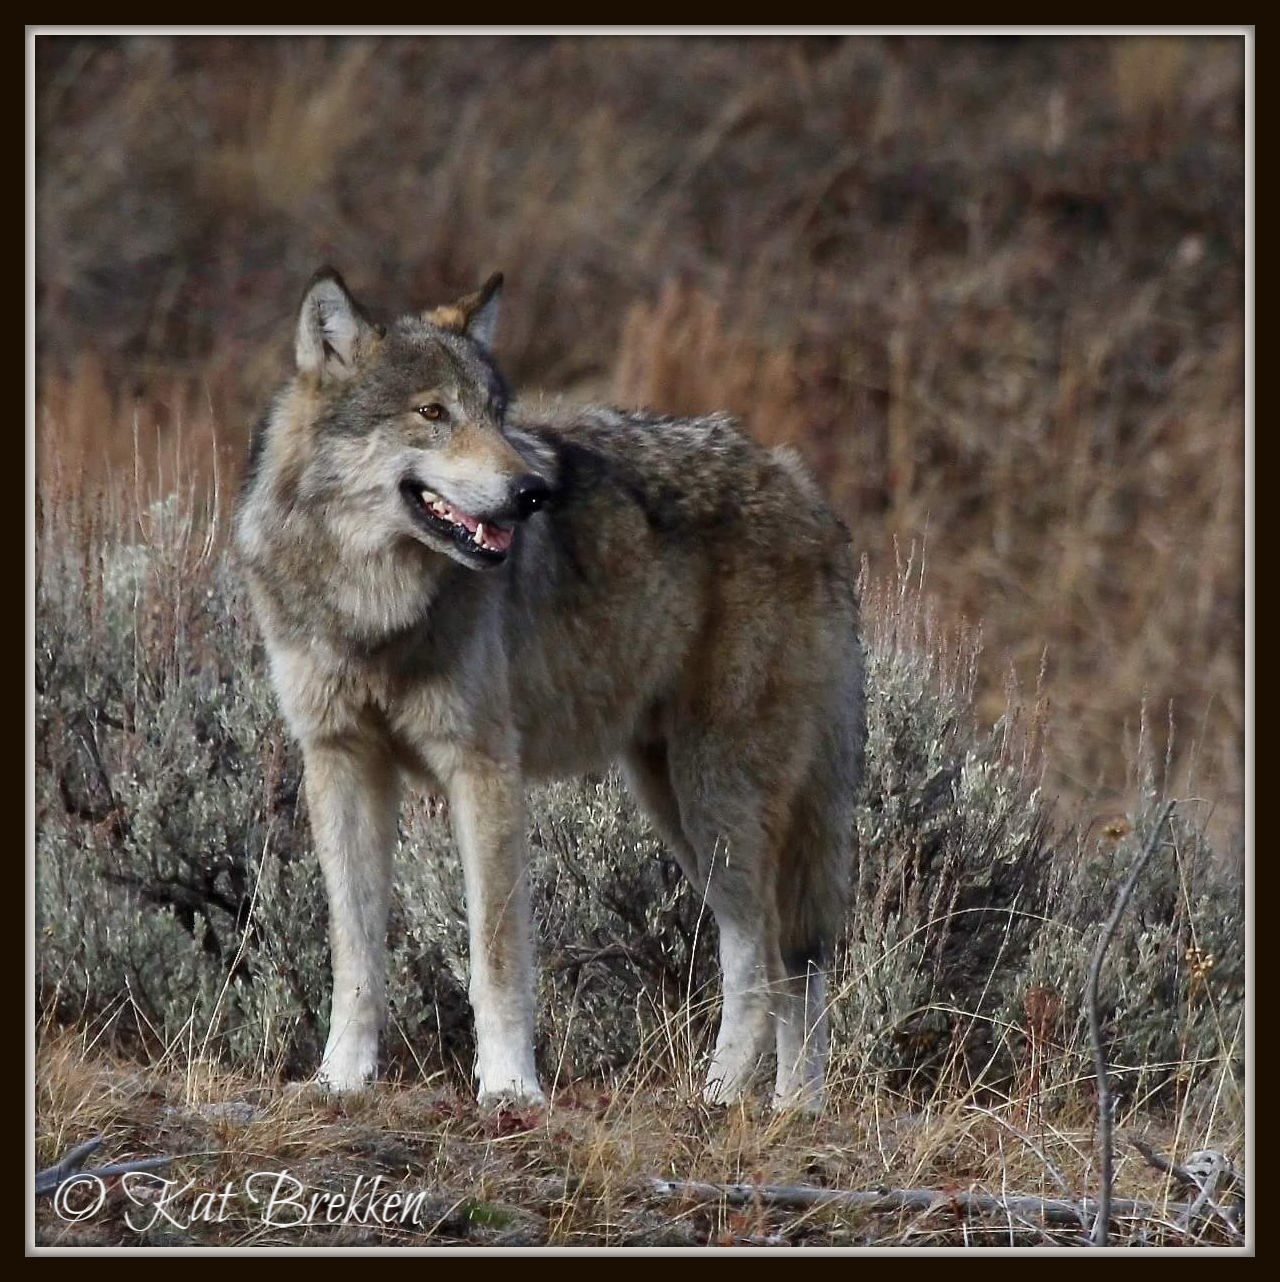 My great friend, Kat Brekken took this photo of 911M, the former alpha male of Junction Butte family. She was my strong support the day he died and always.